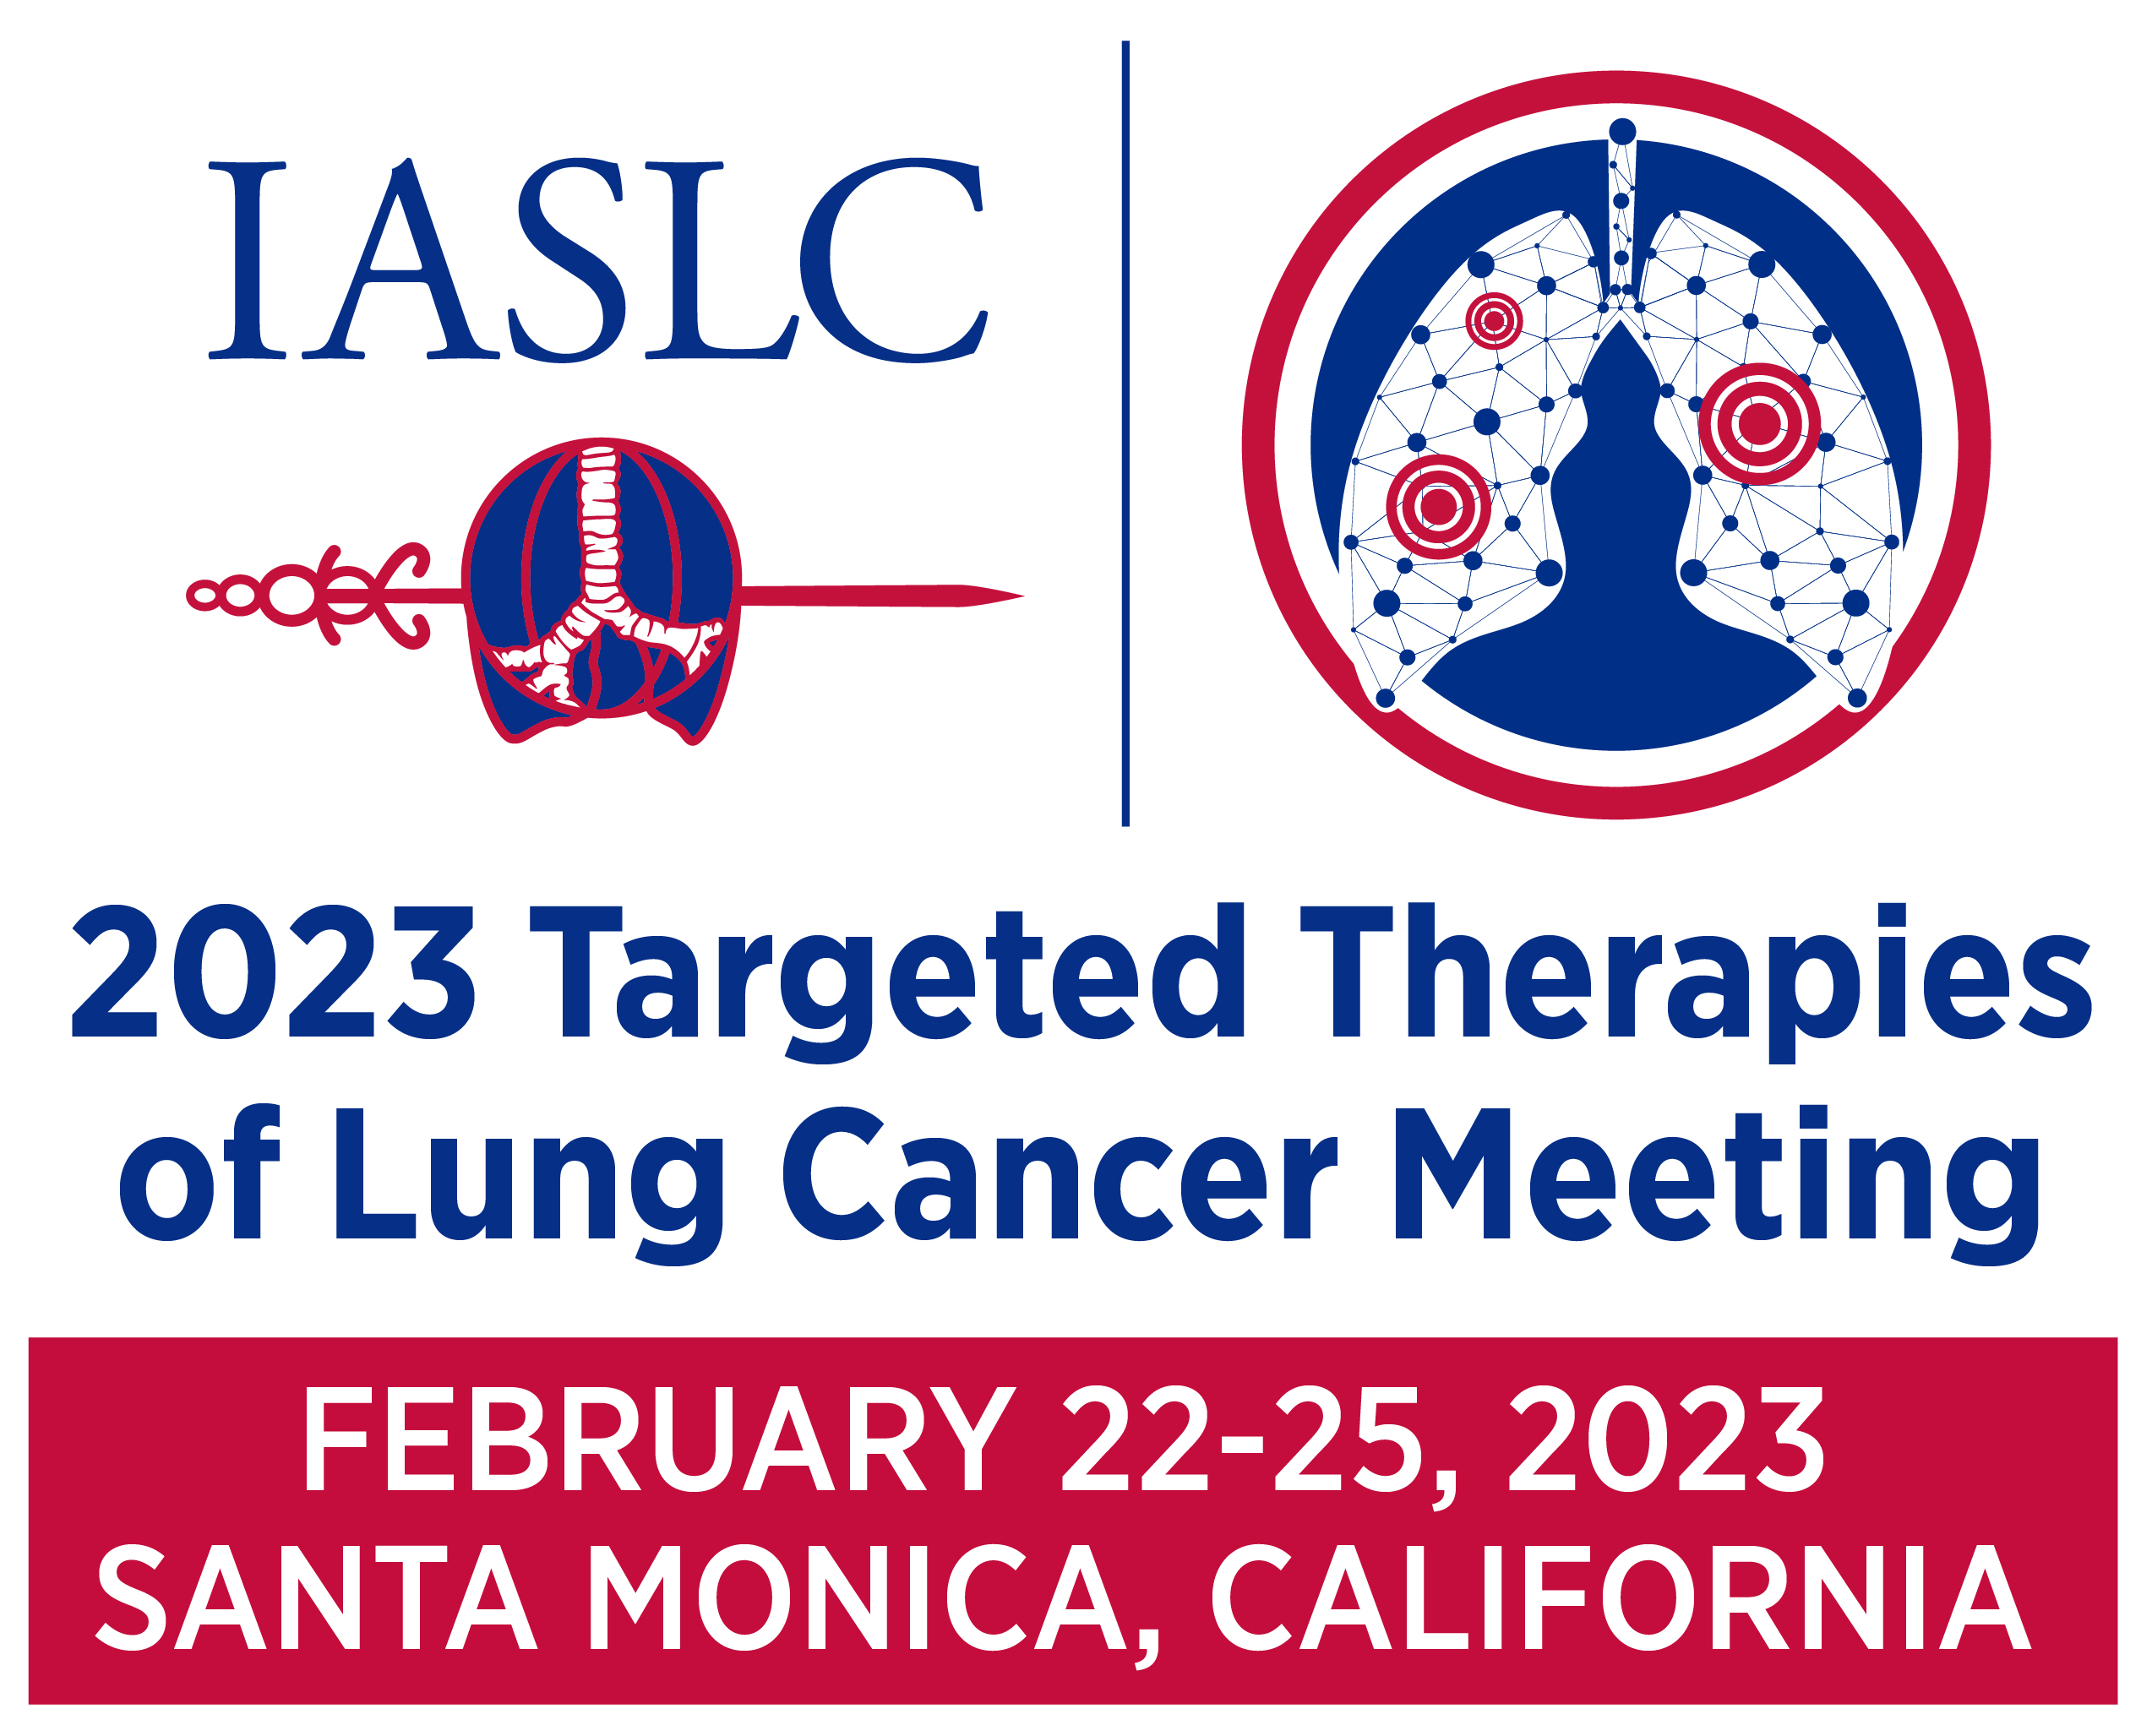 IASLC 2023 Targeted Therapies of Lung Cancer Meeting